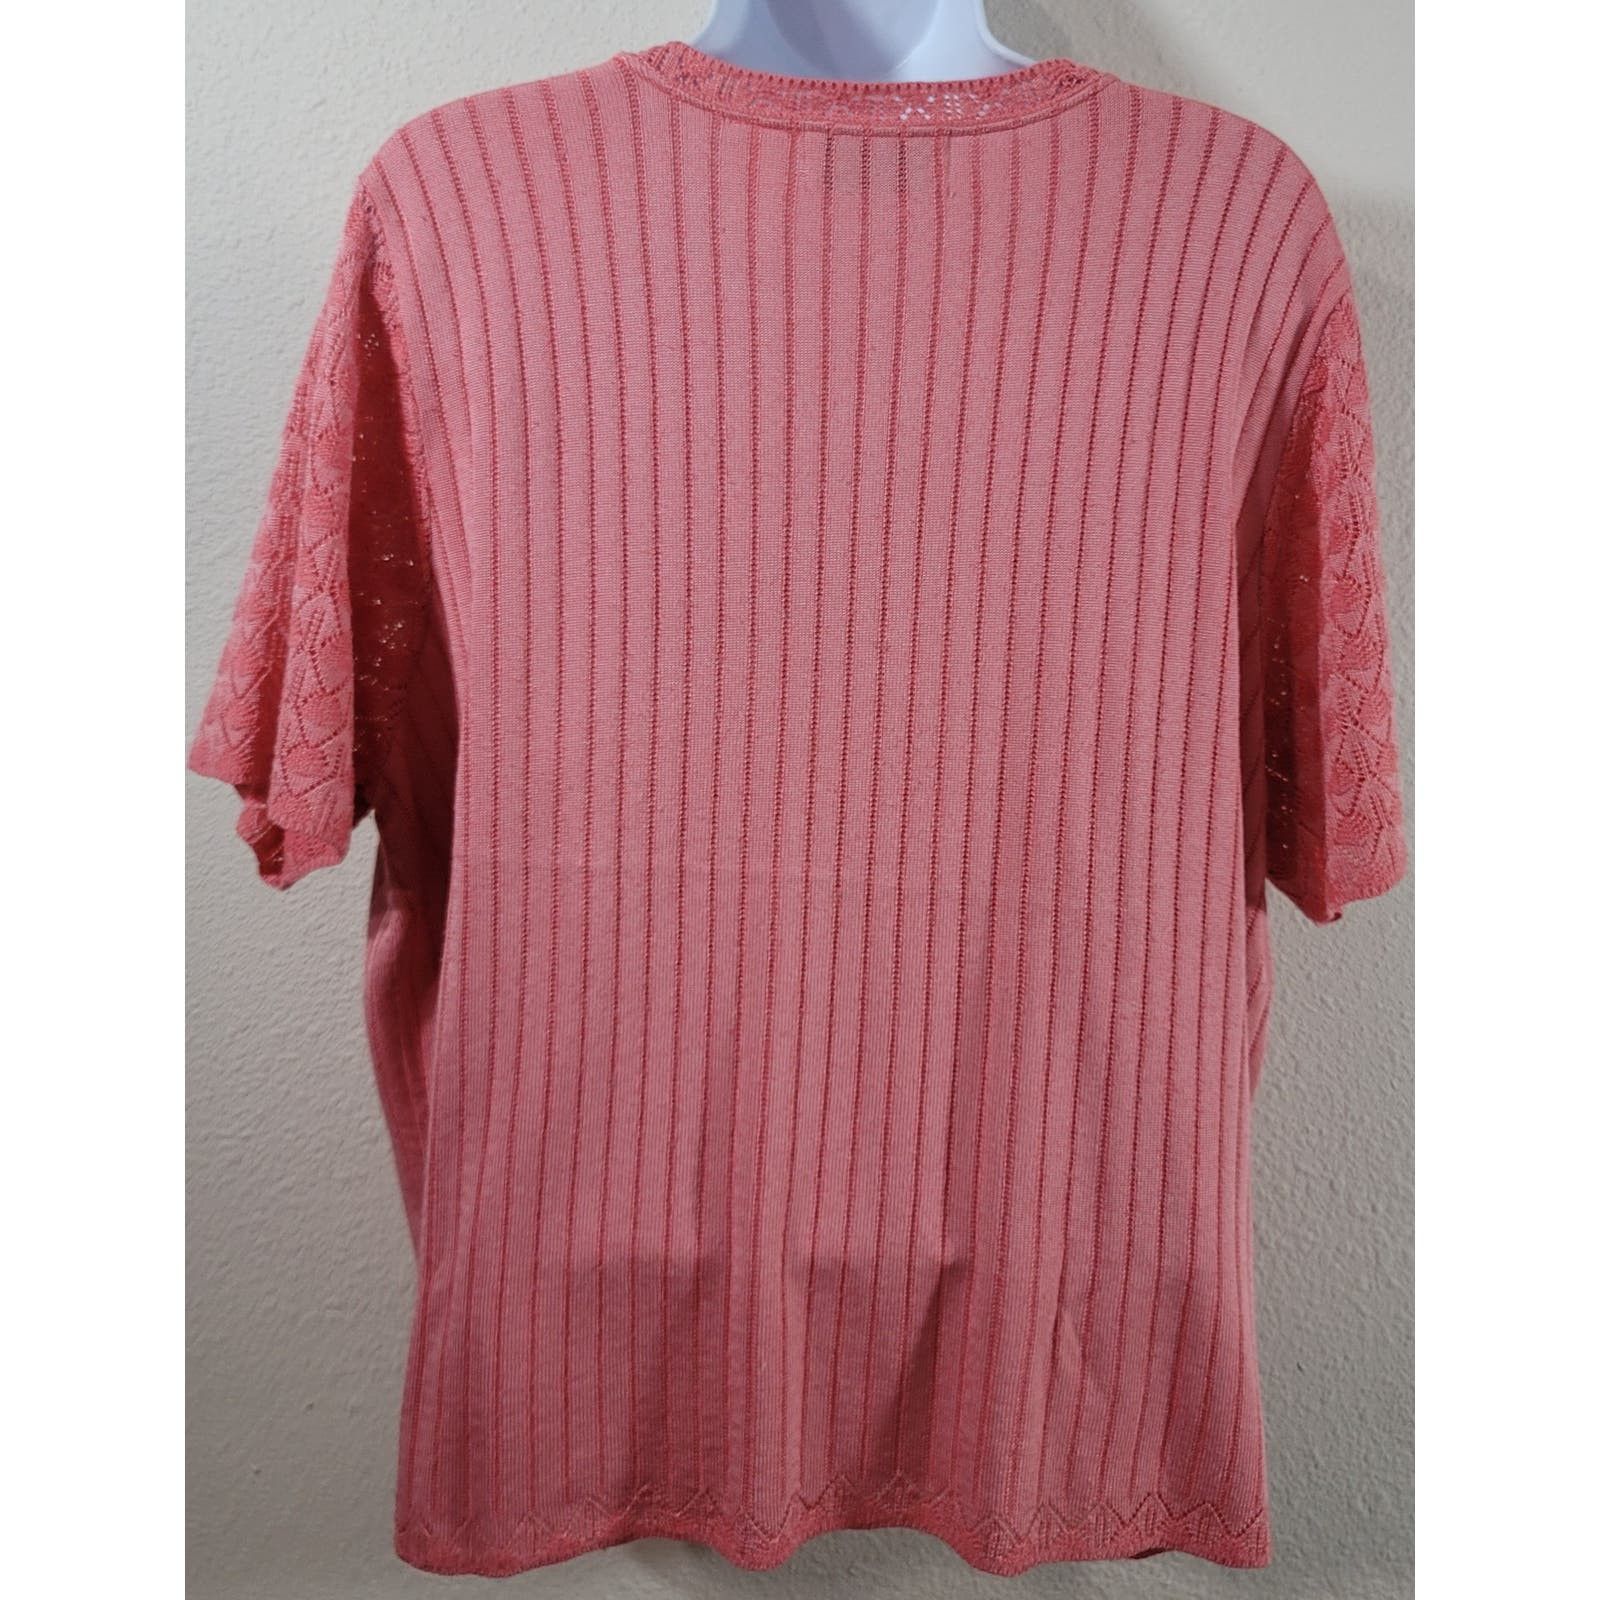 Other Alfred Dunner Coral Orange Pink Round Neck Top XL Stretch Size XL / US 12-14 / IT 48-50 - 3 Thumbnail